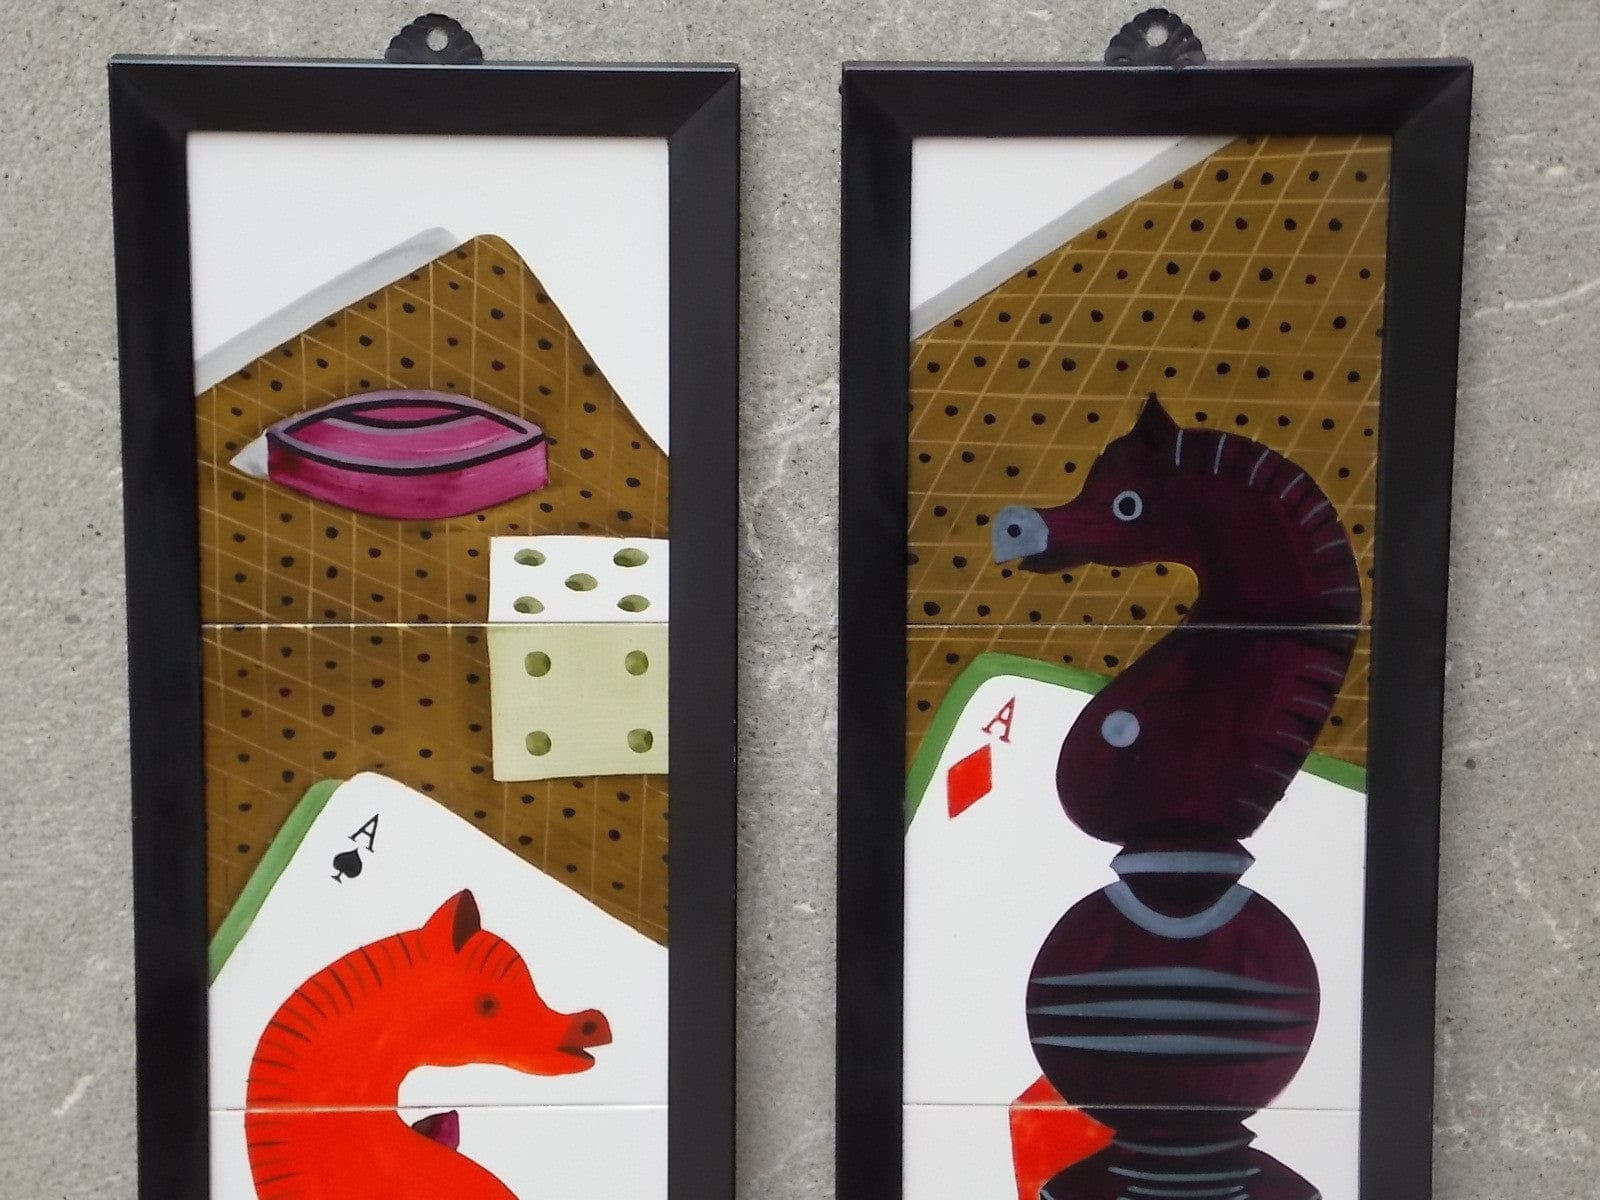 I Like Mike's Mid-Century Modern Wall Decor & Art Pair Black & Red Chess Ceramic Tile Wall Hangings - Game Room Decor